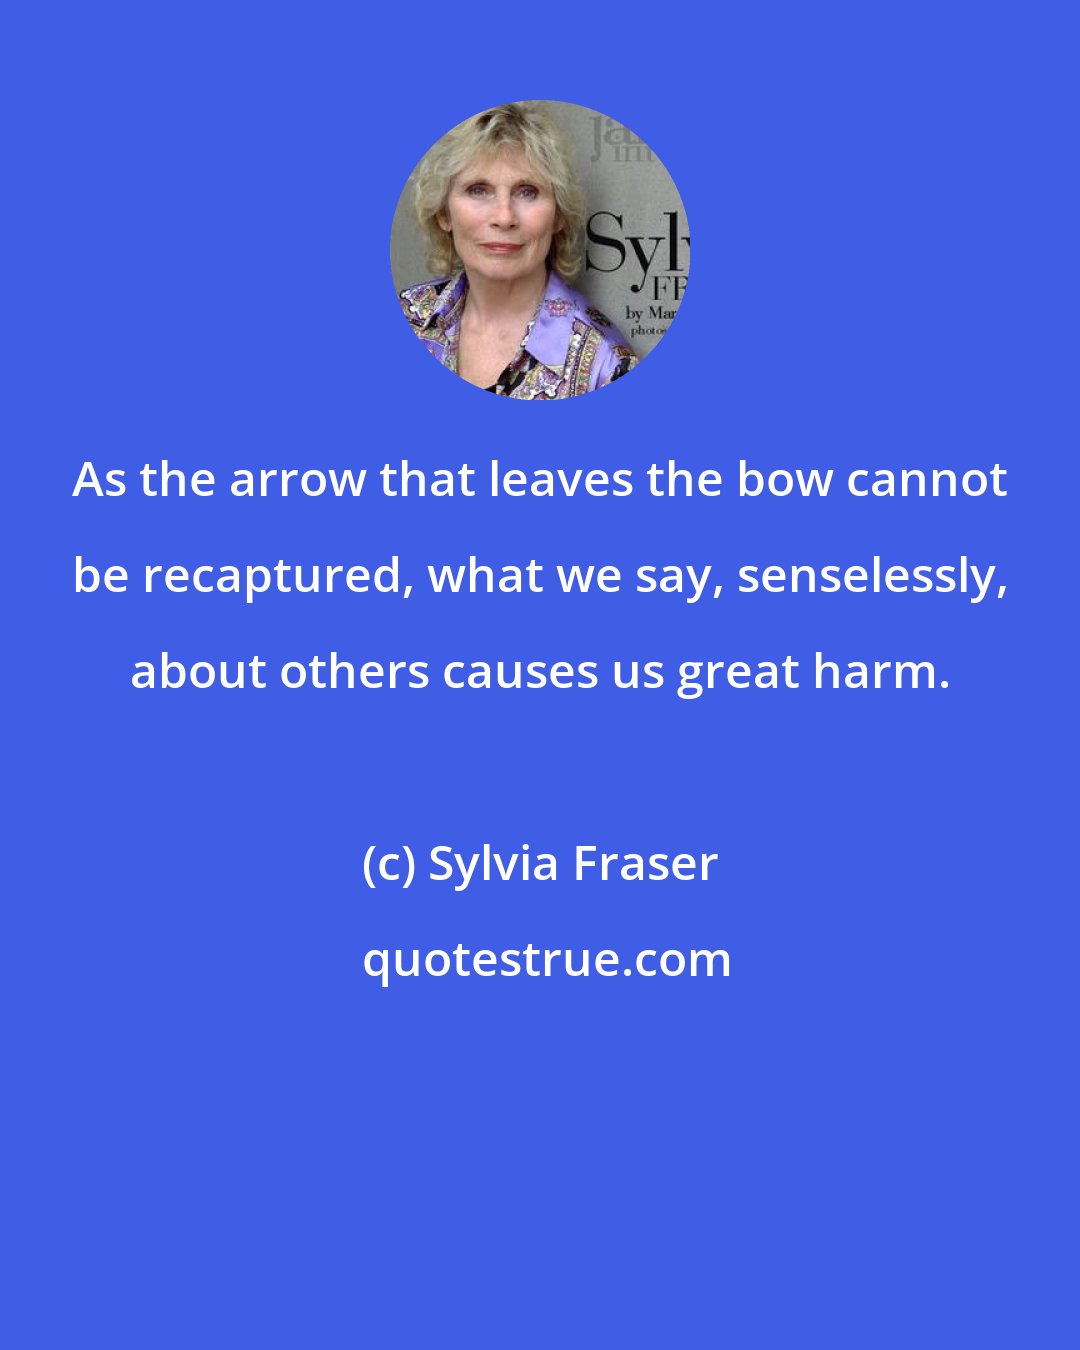 Sylvia Fraser: As the arrow that leaves the bow cannot be recaptured, what we say, senselessly, about others causes us great harm.